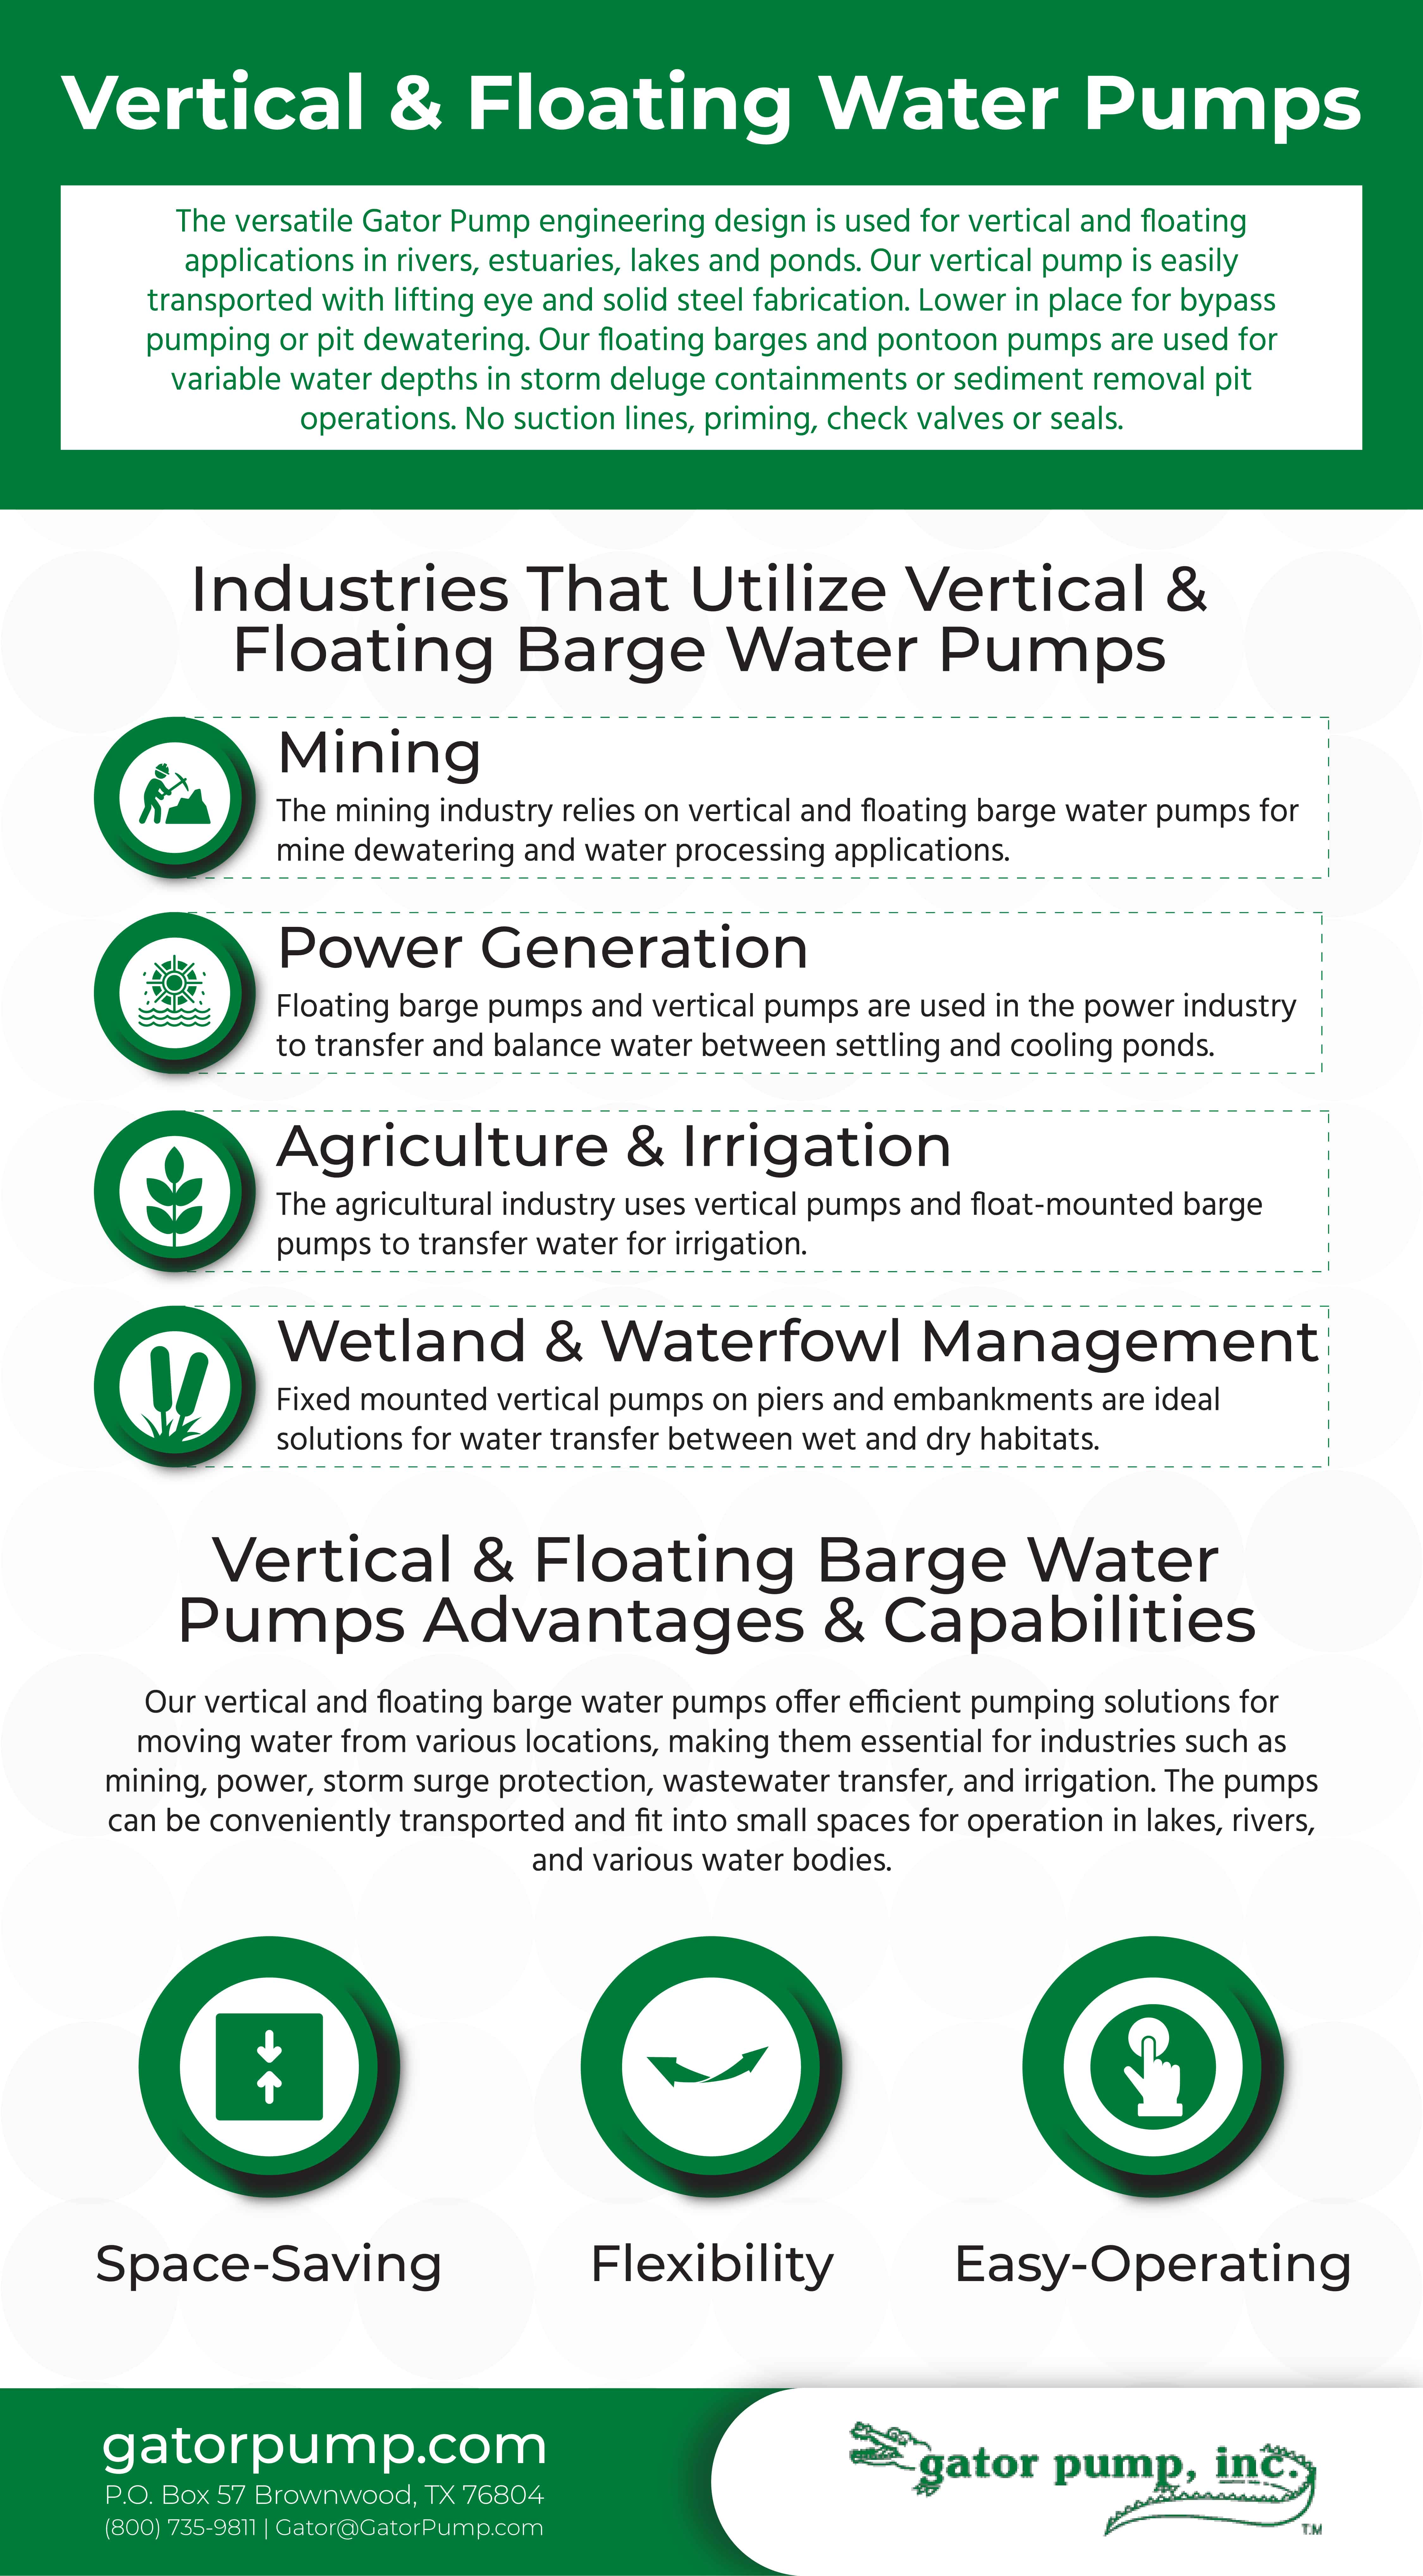 Vertical & Floating Barge Water Pumps Advantages and Capabilities